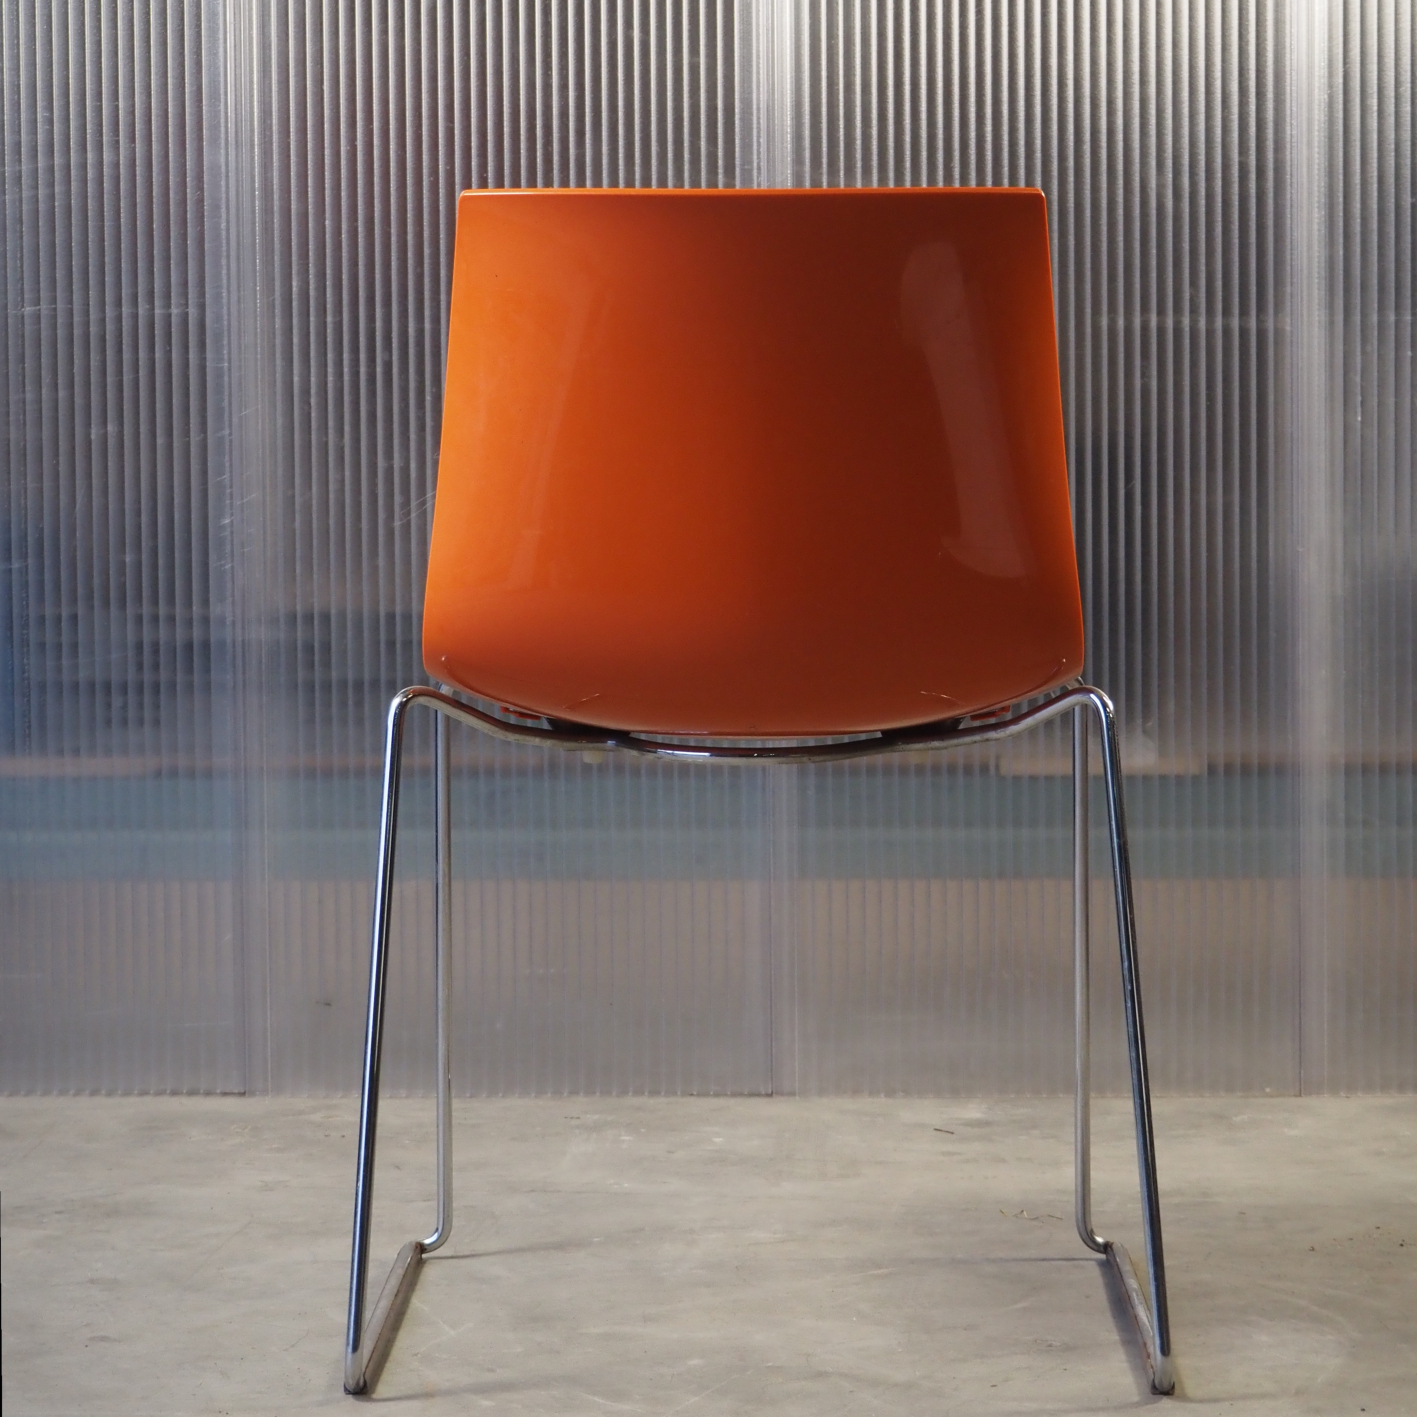 Stackable chair 'Catifa 46' by Lievore Altherr Molina for Arper (ca. 2004) - Orange